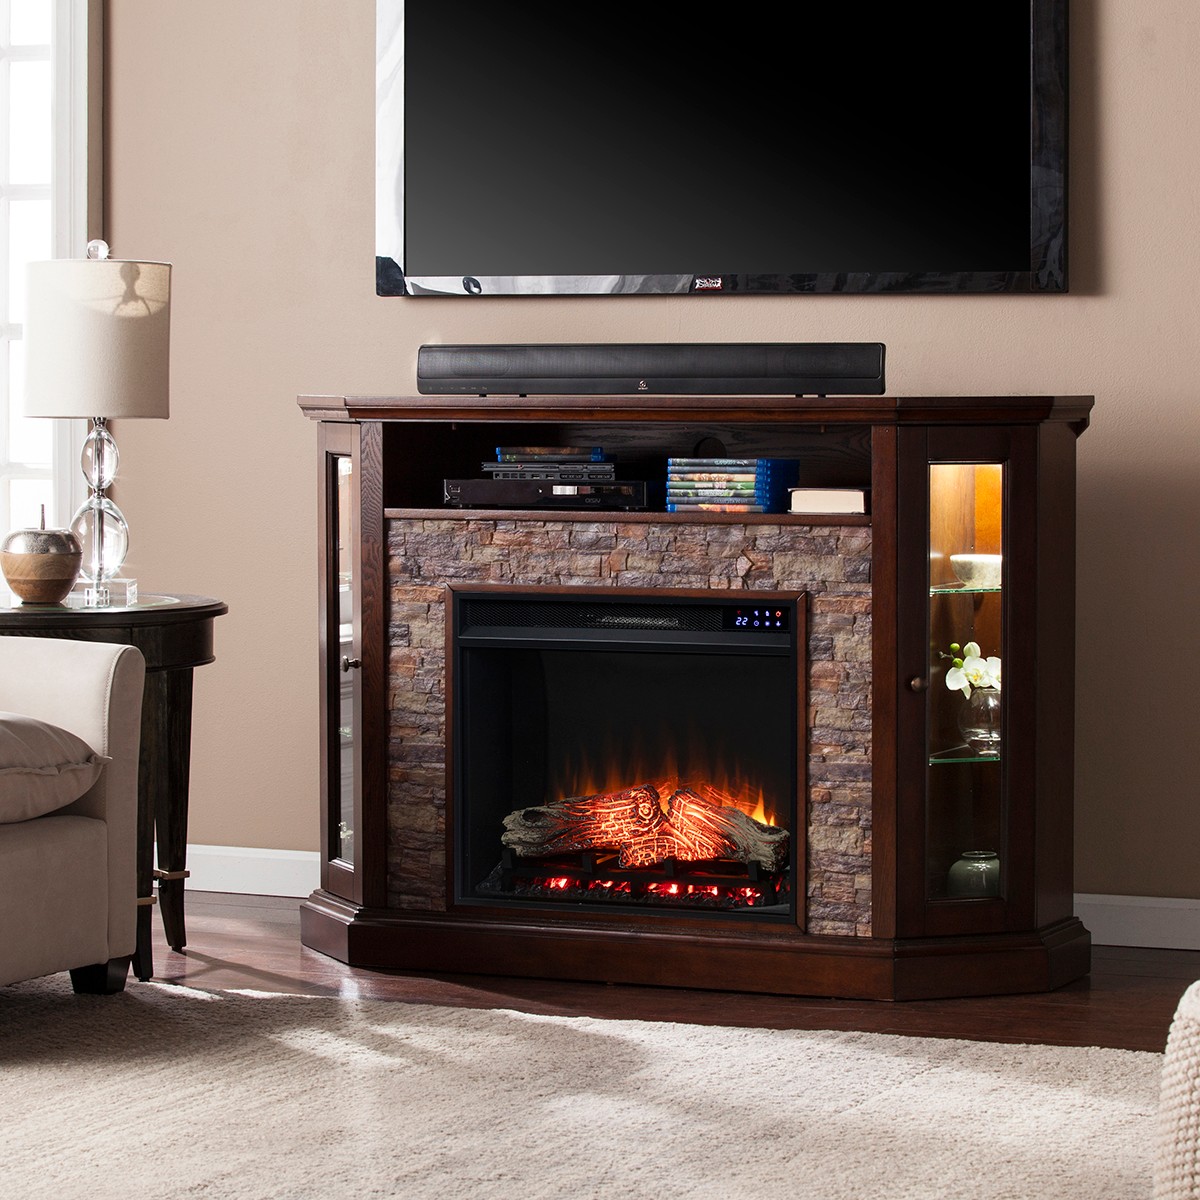 Better homes and gardens media electric fireplace ashwood road brown marcille grapa forex factory